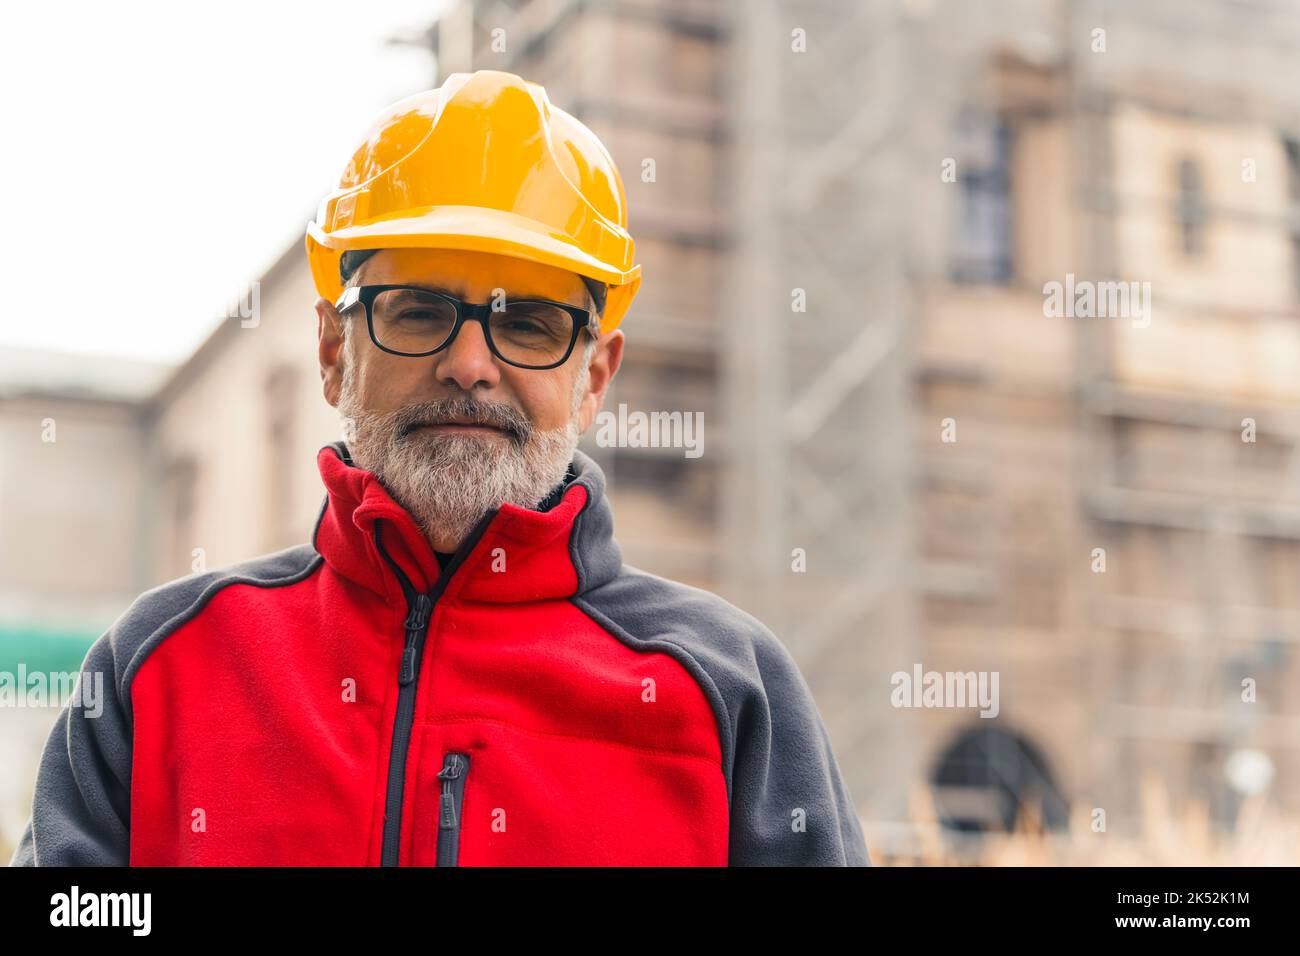 Satisfied with his work caucasian construction worker in his late 50s looking at camera in protective gear and standing in front of blurred building during renovation. Blue-collar jobs concept. High quality photo Stock Photo